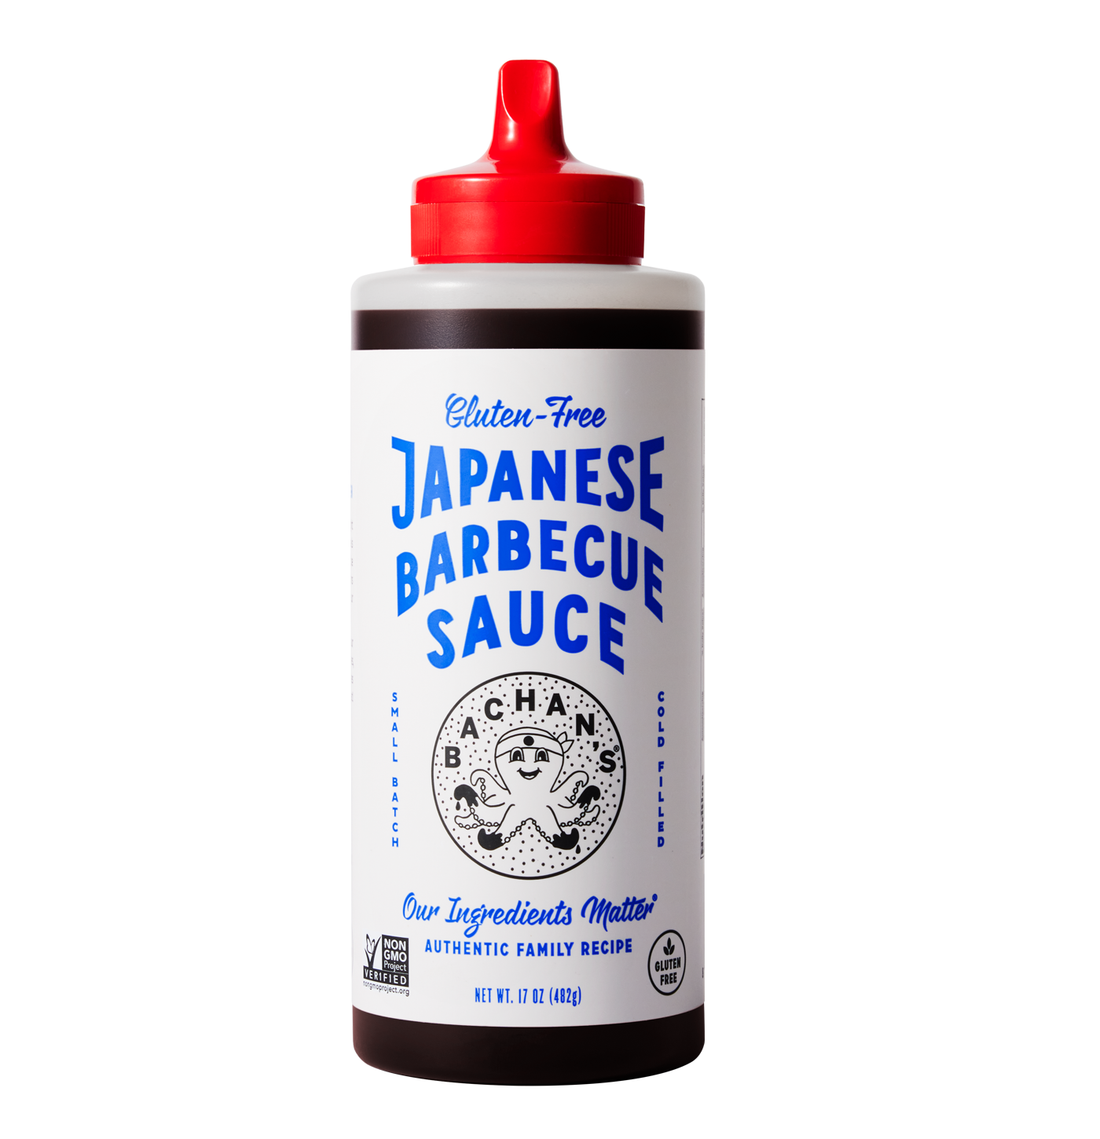 Gluten-Free Japanese Barbecue Sauce